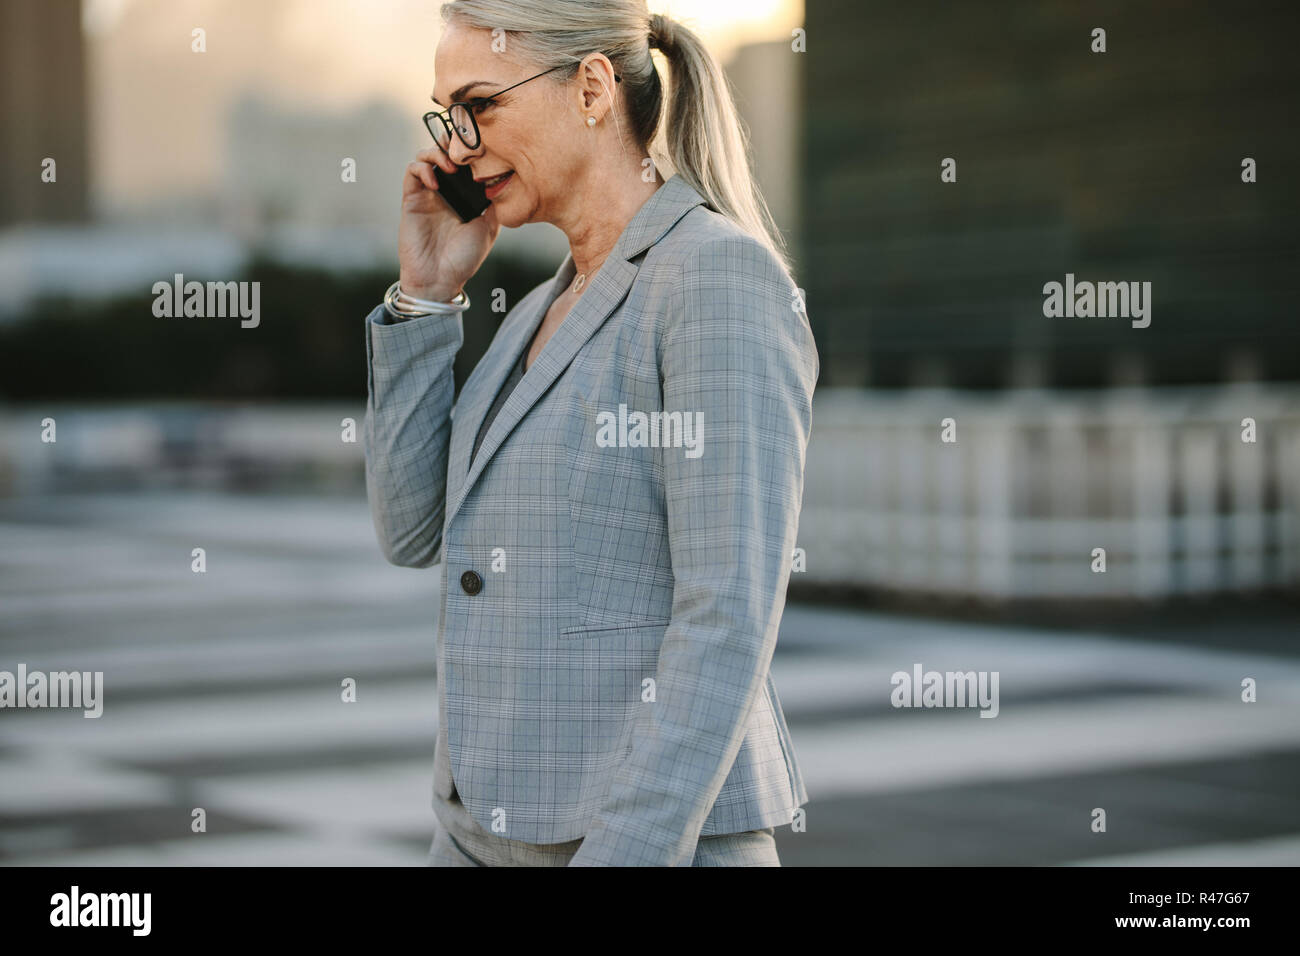 Mature businesswoman on way to home using phone. Senior executive walking on city street talking on cellphone during evening. Stock Photo